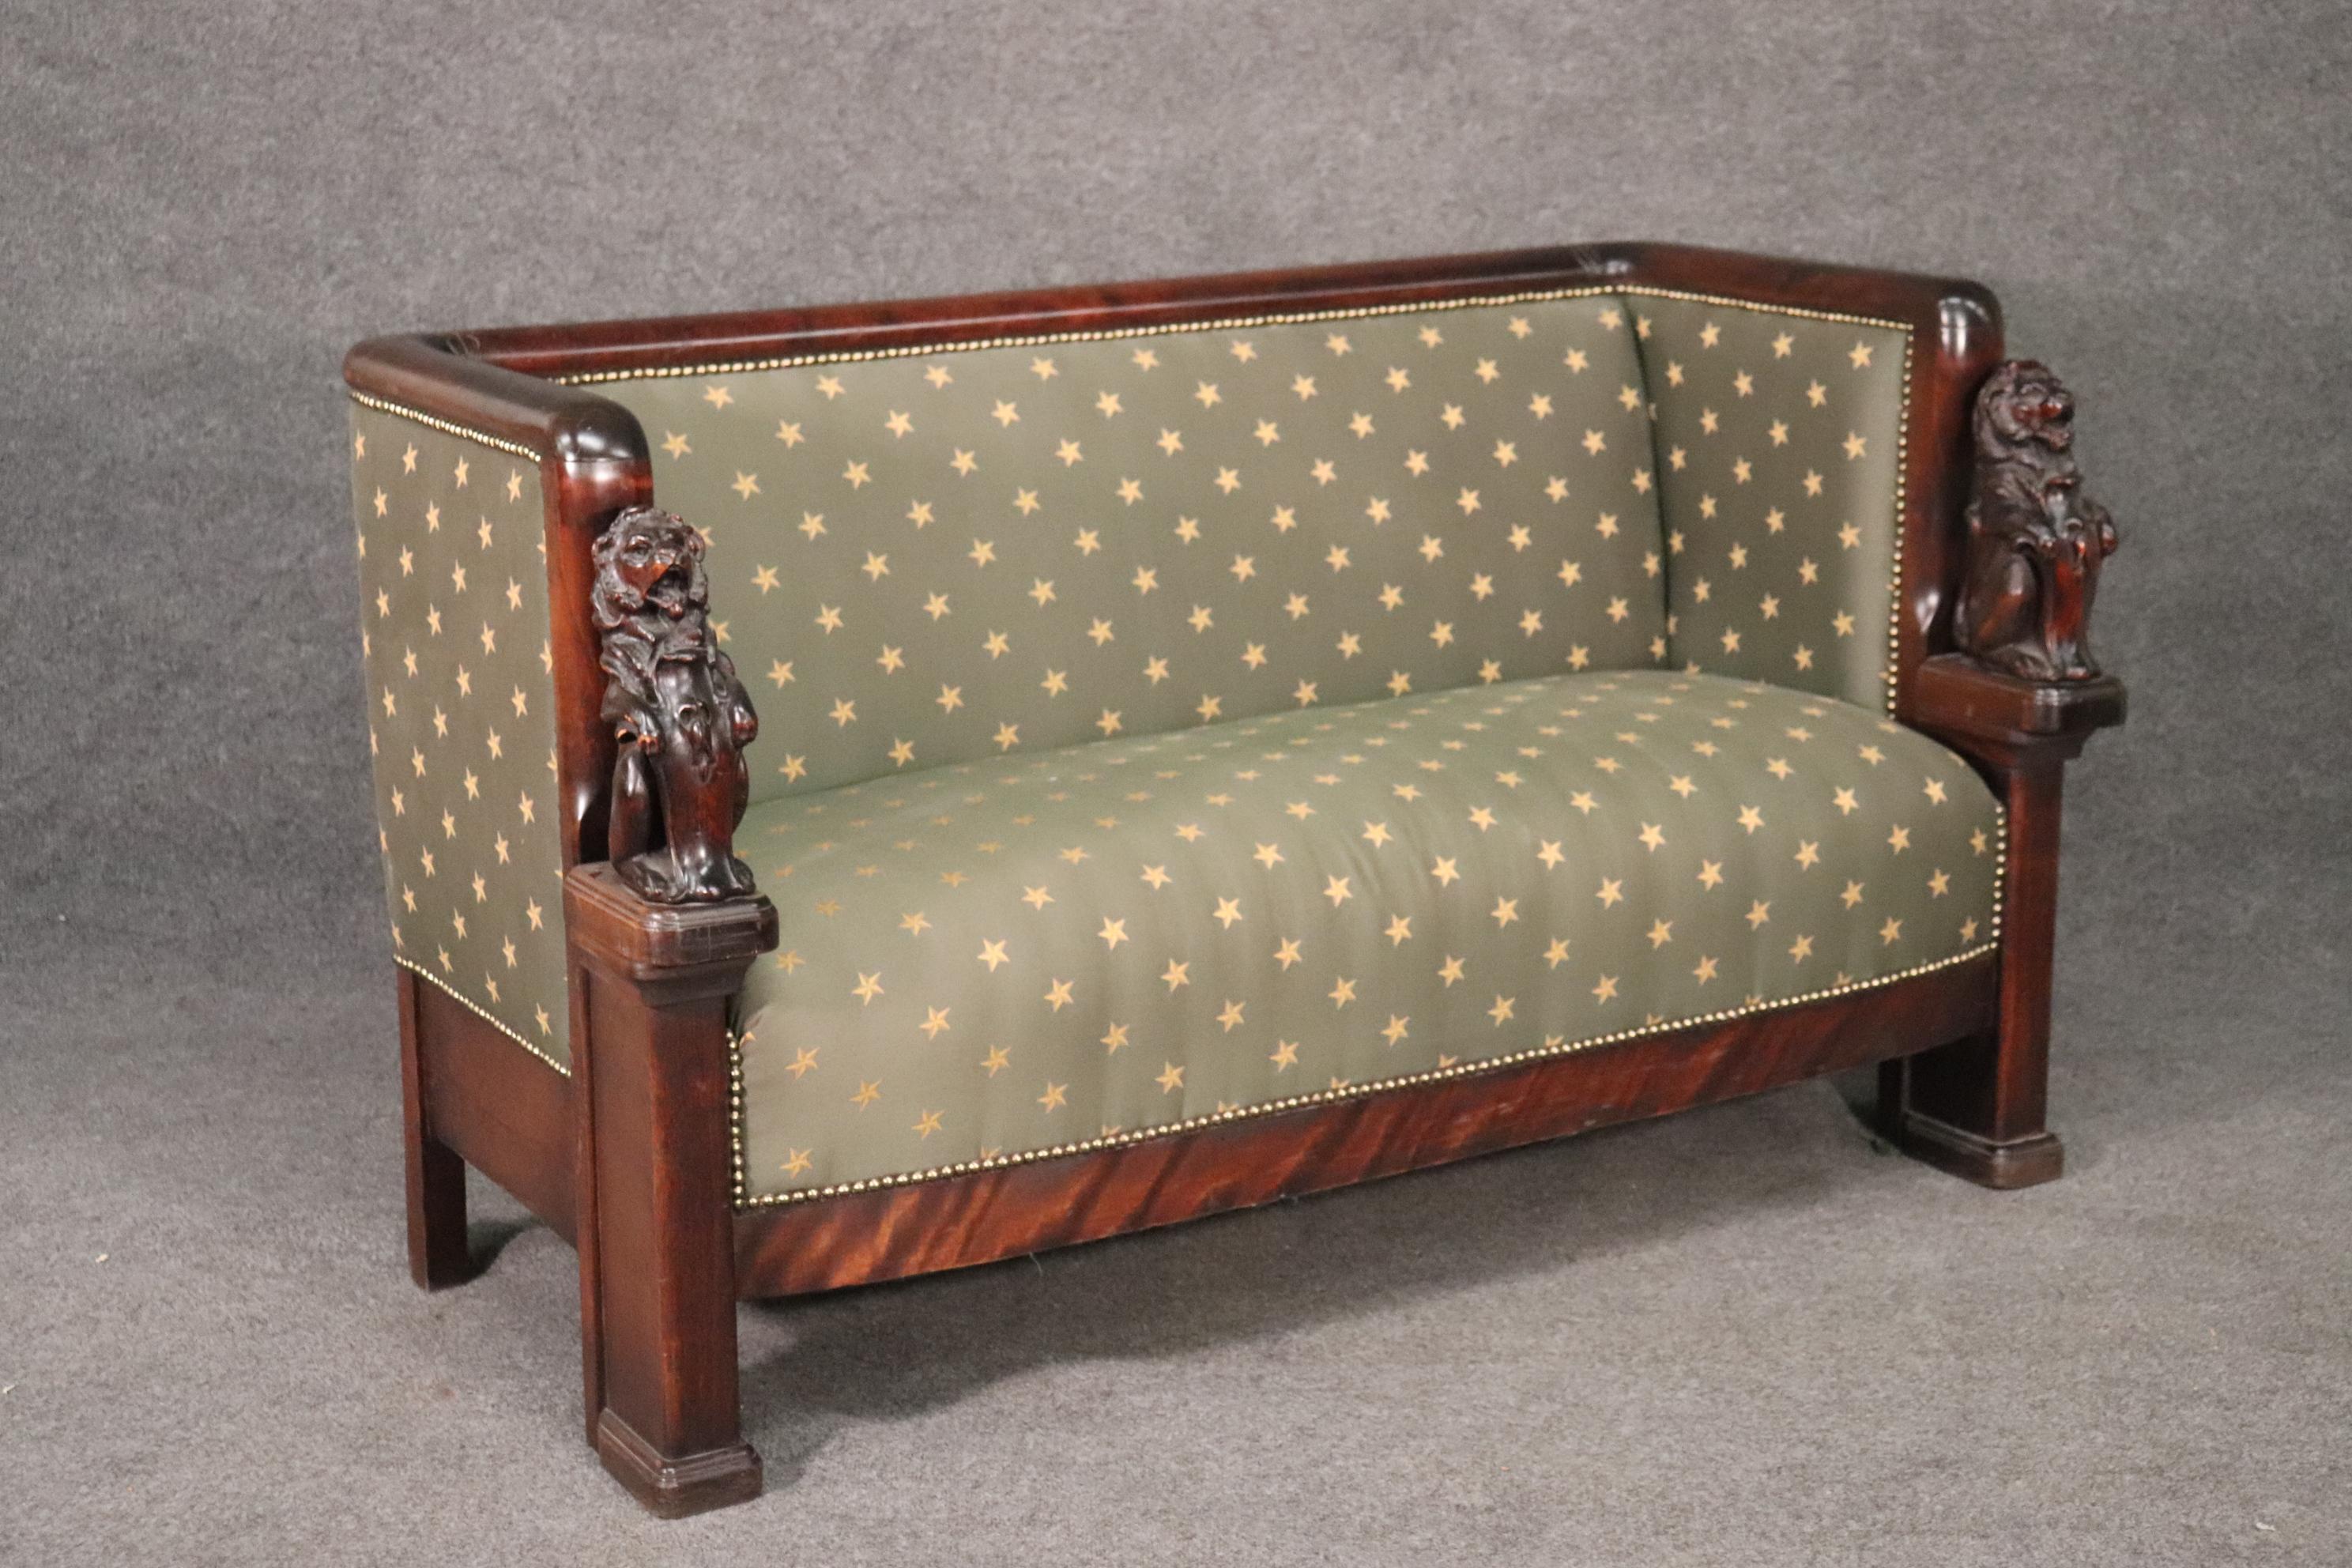 This is a gorgeous carved mahogany French sofa. The sofa has beautiful upholstery and the carving is exceptional. The sofa dates to the 1880s era and measures 60 wide x 31 deep x 34 tall and the seat height is 18 inches.